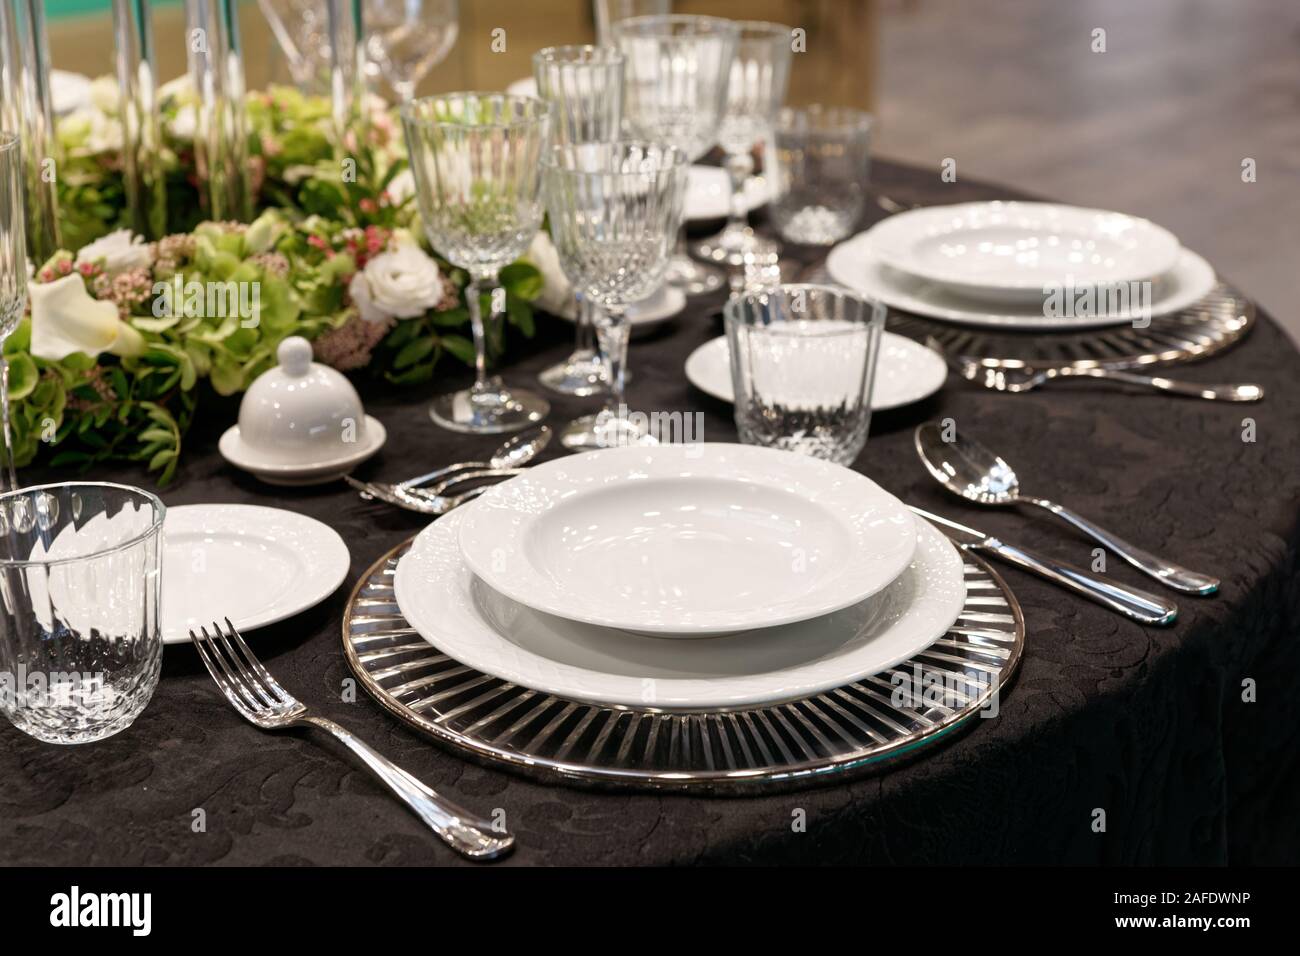 Expensive stylish set of porcelain, cutlery and glassware, place ...